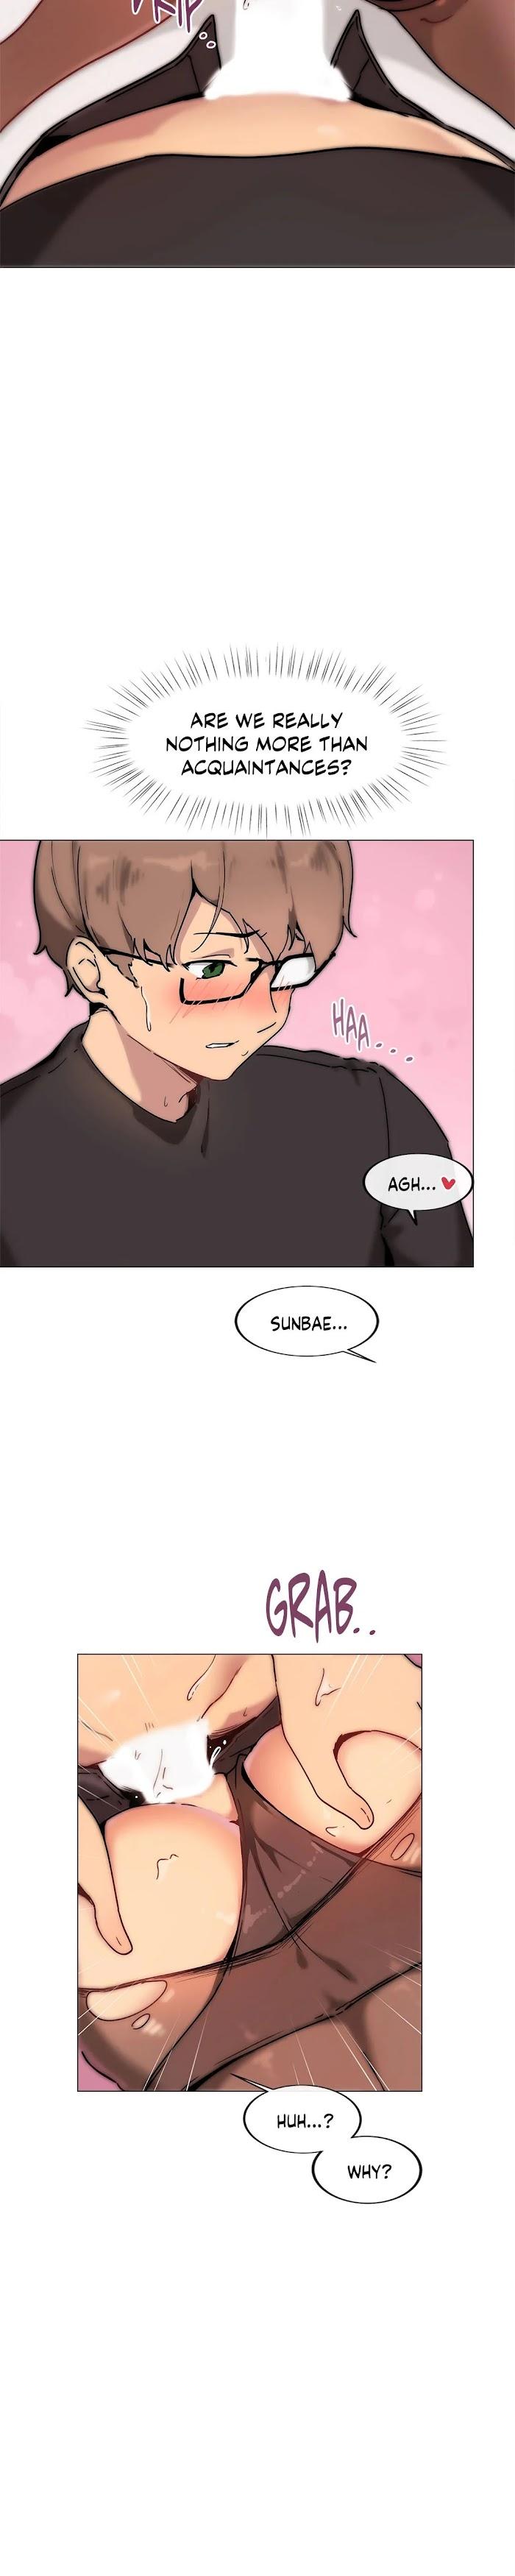 [Dumangoon, 130F] Sexcape Room: Wipe Out Ch.9/9 [English] [Manhwa PDF] Completed 83